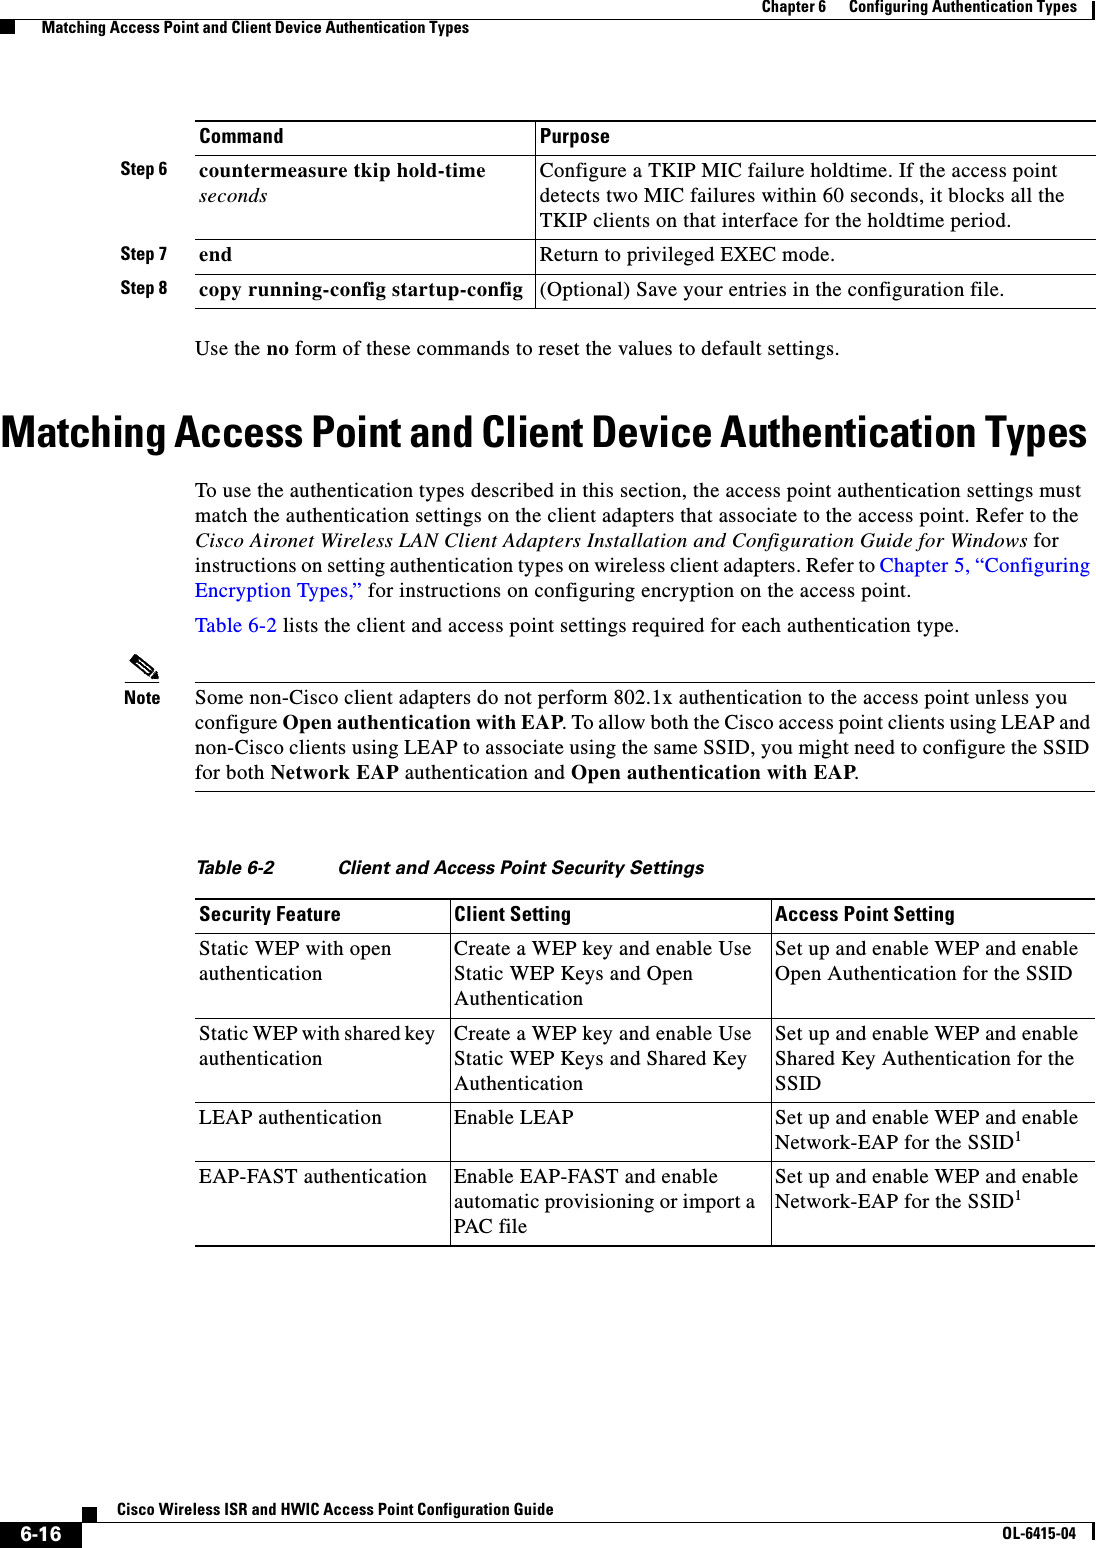 6-16Cisco Wireless ISR and HWIC Access Point Configuration GuideOL-6415-04Chapter 6      Configuring Authentication Types  Matching Access Point and Client Device Authentication TypesUse the no form of these commands to reset the values to default settings. Matching Access Point and Client Device Authentication Types To use the authentication types described in this section, the access point authentication settings must match the authentication settings on the client adapters that associate to the access point. Refer to the Cisco Aironet Wireless LAN Client Adapters Installation and Configuration Guide for Windows for instructions on setting authentication types on wireless client adapters. Refer to Chapter 5, “Configuring Encryption Types,” for instructions on configuring encryption on the access point. Table 6-2 lists the client and access point settings required for each authentication type.Note Some non-Cisco client adapters do not perform 802.1x authentication to the access point unless you configure Open authentication with EAP. To allow both the Cisco access point clients using LEAP and non-Cisco clients using LEAP to associate using the same SSID, you might need to configure the SSID for both Network EAP authentication and Open authentication with EAP.Step 6 countermeasure tkip hold-time secondsConfigure a TKIP MIC failure holdtime. If the access point detects two MIC failures within 60 seconds, it blocks all the TKIP clients on that interface for the holdtime period.Step 7 end Return to privileged EXEC mode.Step 8 copy running-config startup-config (Optional) Save your entries in the configuration file.Command PurposeTa b l e  6-2 Client and Access Point Security Settings Security Feature Client Setting Access Point SettingStatic WEP with open authenticationCreate a WEP key and enable Use Static WEP Keys and Open AuthenticationSet up and enable WEP and enable Open Authentication for the SSIDStatic WEP with shared key authenticationCreate a WEP key and enable Use Static WEP Keys and Shared Key AuthenticationSet up and enable WEP and enable Shared Key Authentication for the SSIDLEAP authentication Enable LEAP Set up and enable WEP and enable Network-EAP for the SSID1EAP-FAST authentication Enable EAP-FAST and enable automatic provisioning or import a PAC fileSet up and enable WEP and enable Network-EAP for the SSID1